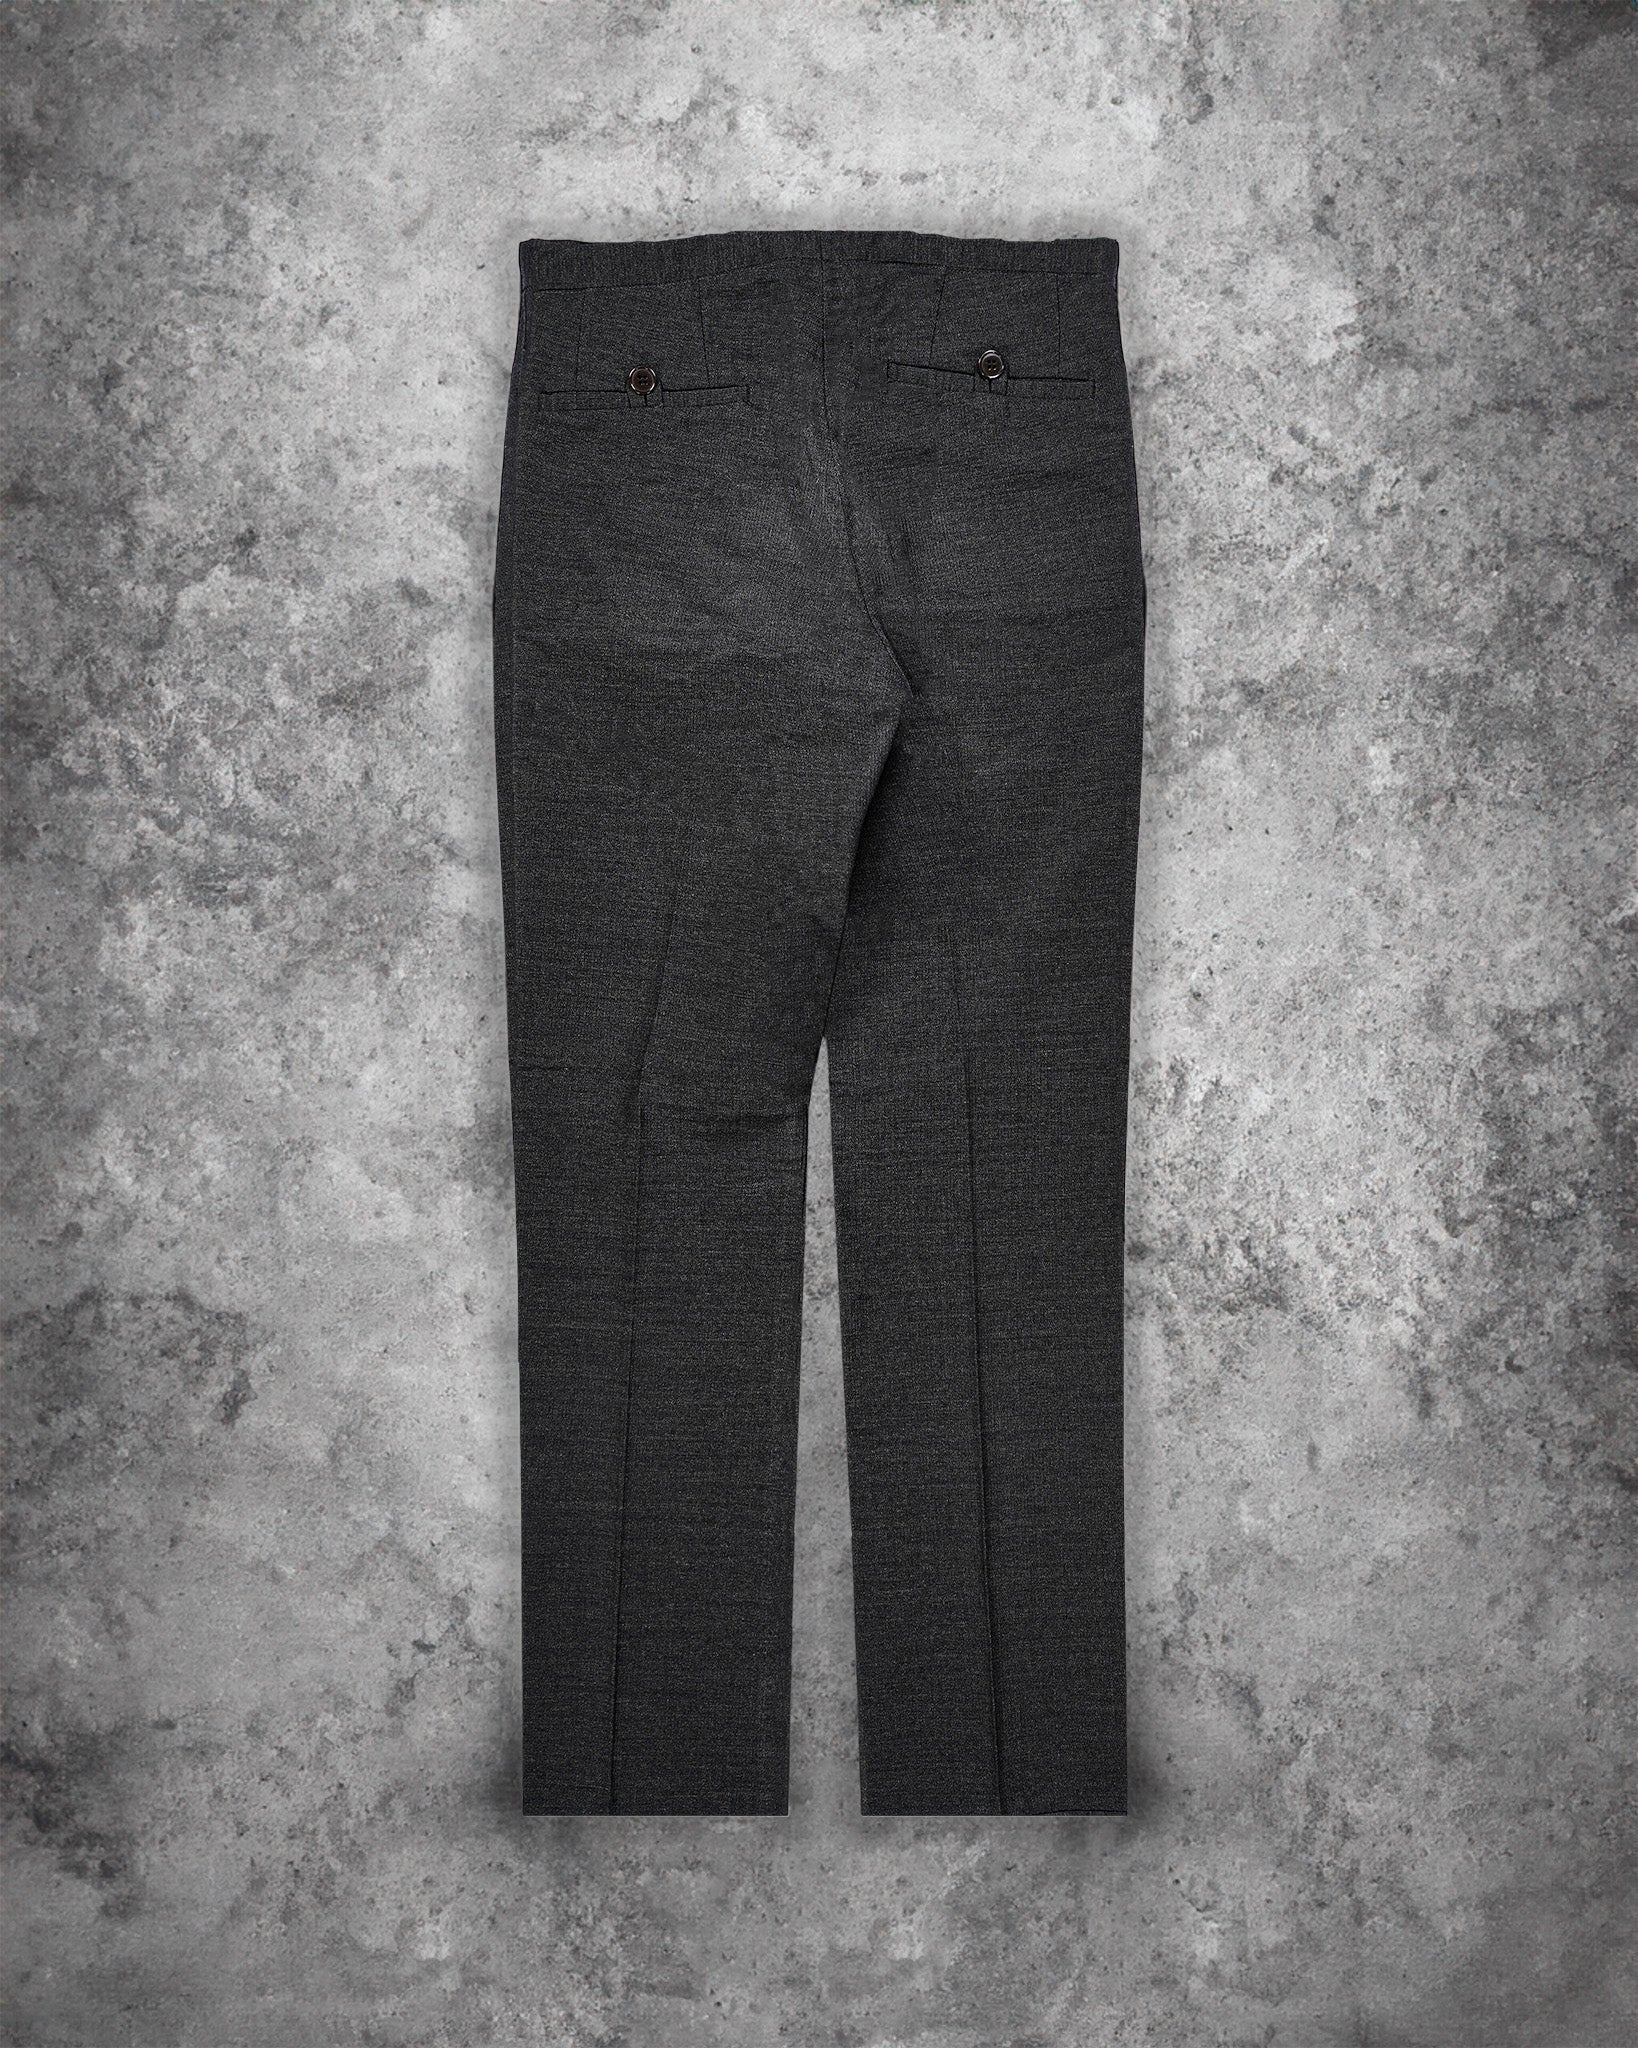 Carol Christian Poell Wool Trousers - AW07 “Disjointed” (PM/2104L TEER/9)